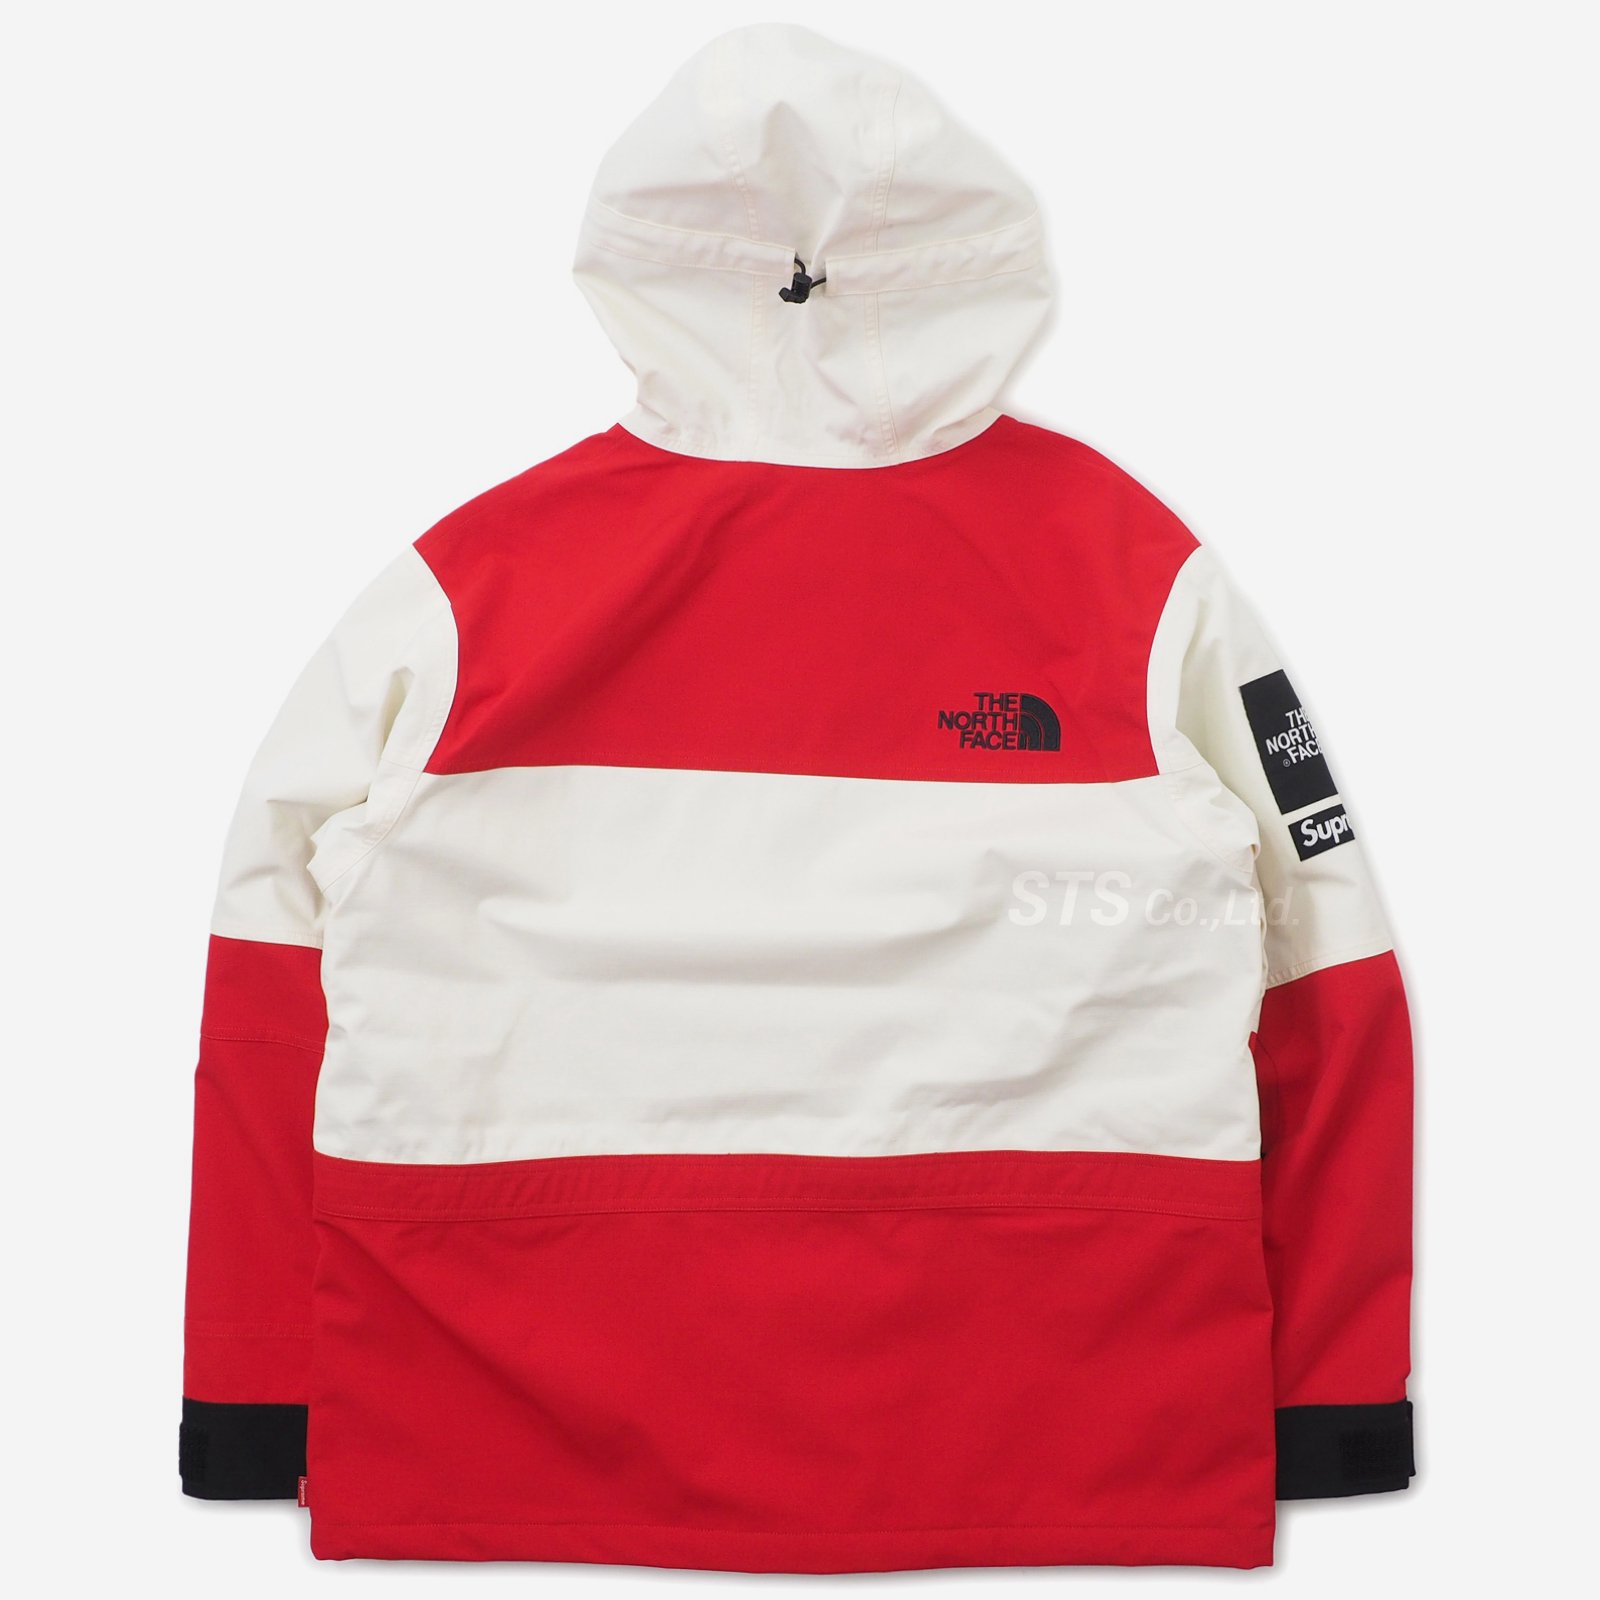 S Supreme/TNF Expedition Jacket white